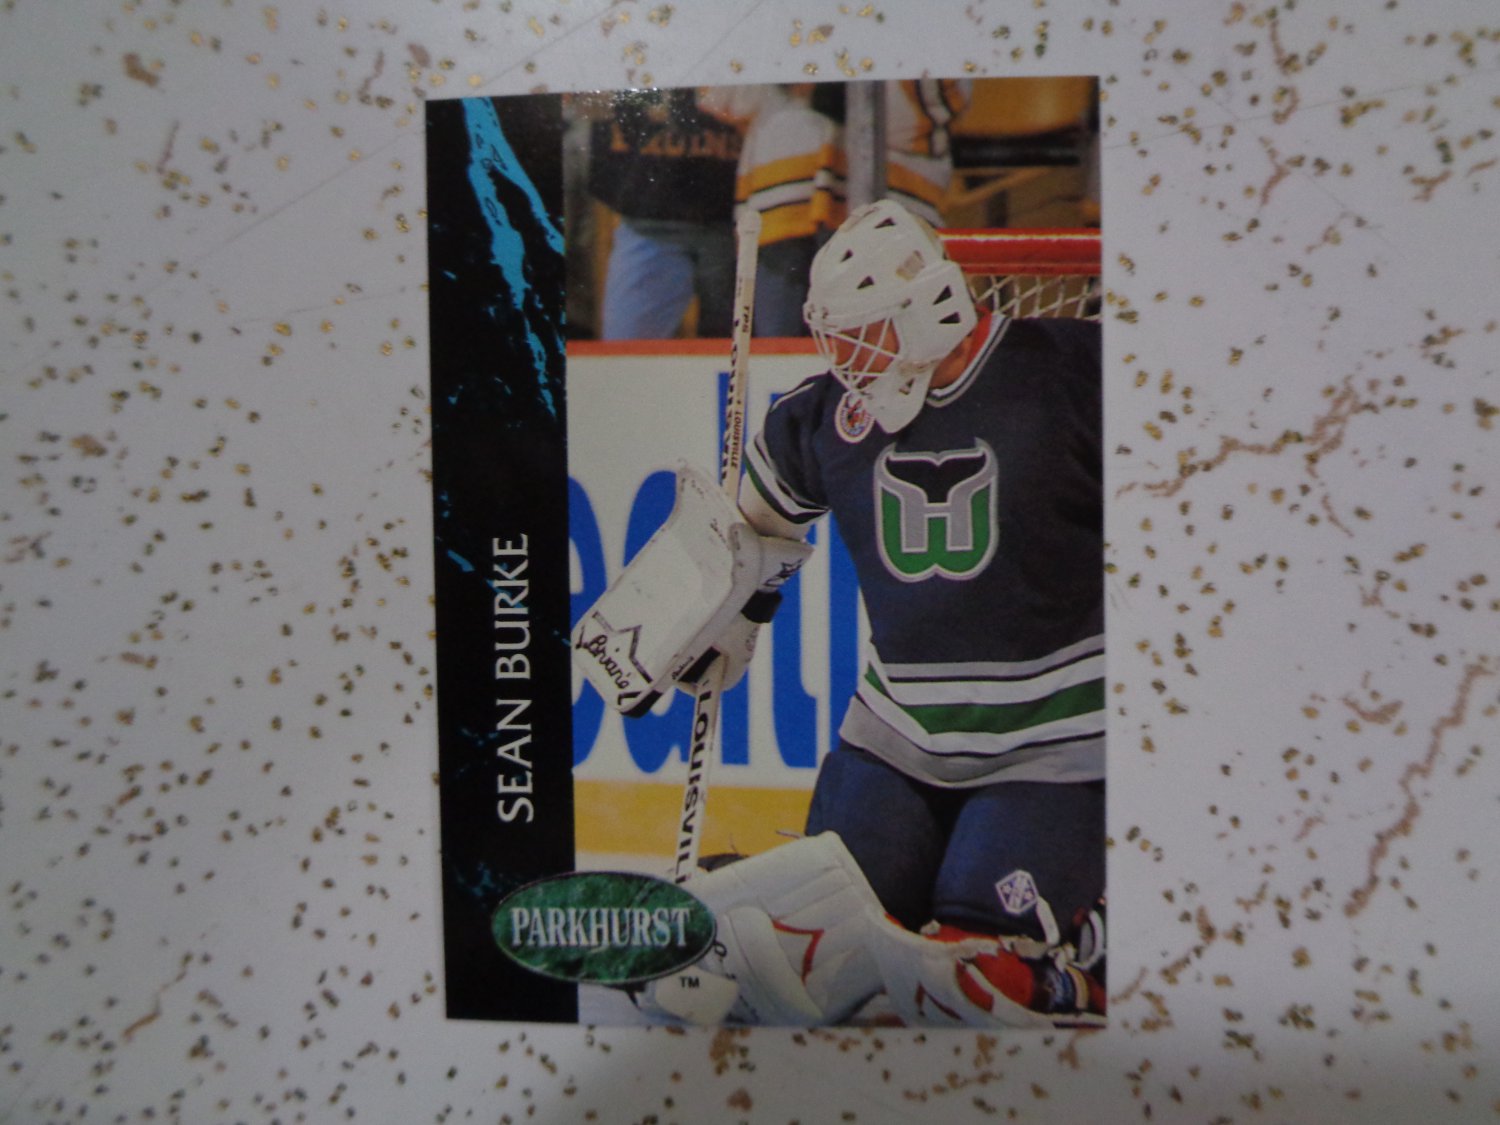 1992-1993 Parkhurst preview card, were randomly inserted in pro set.